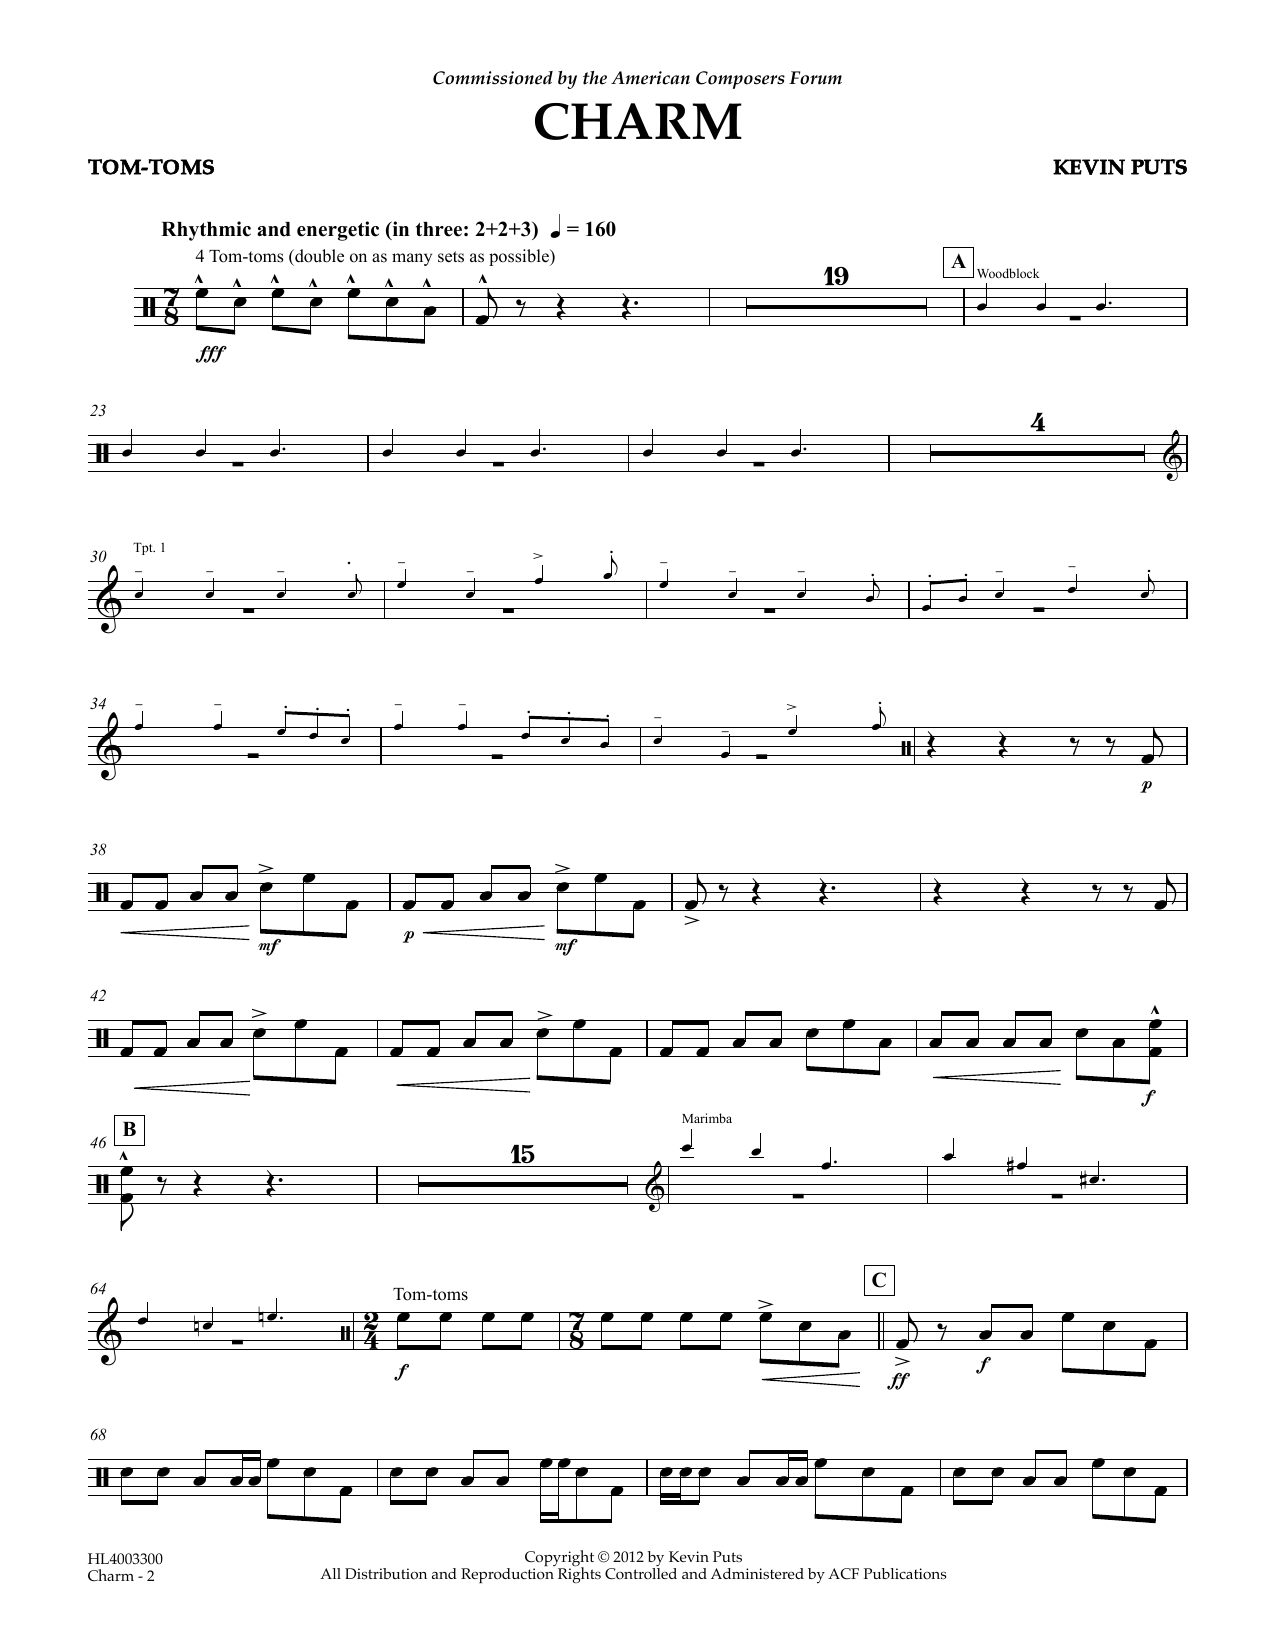 Download Kevin Puts Charm - Tom-Toms Sheet Music